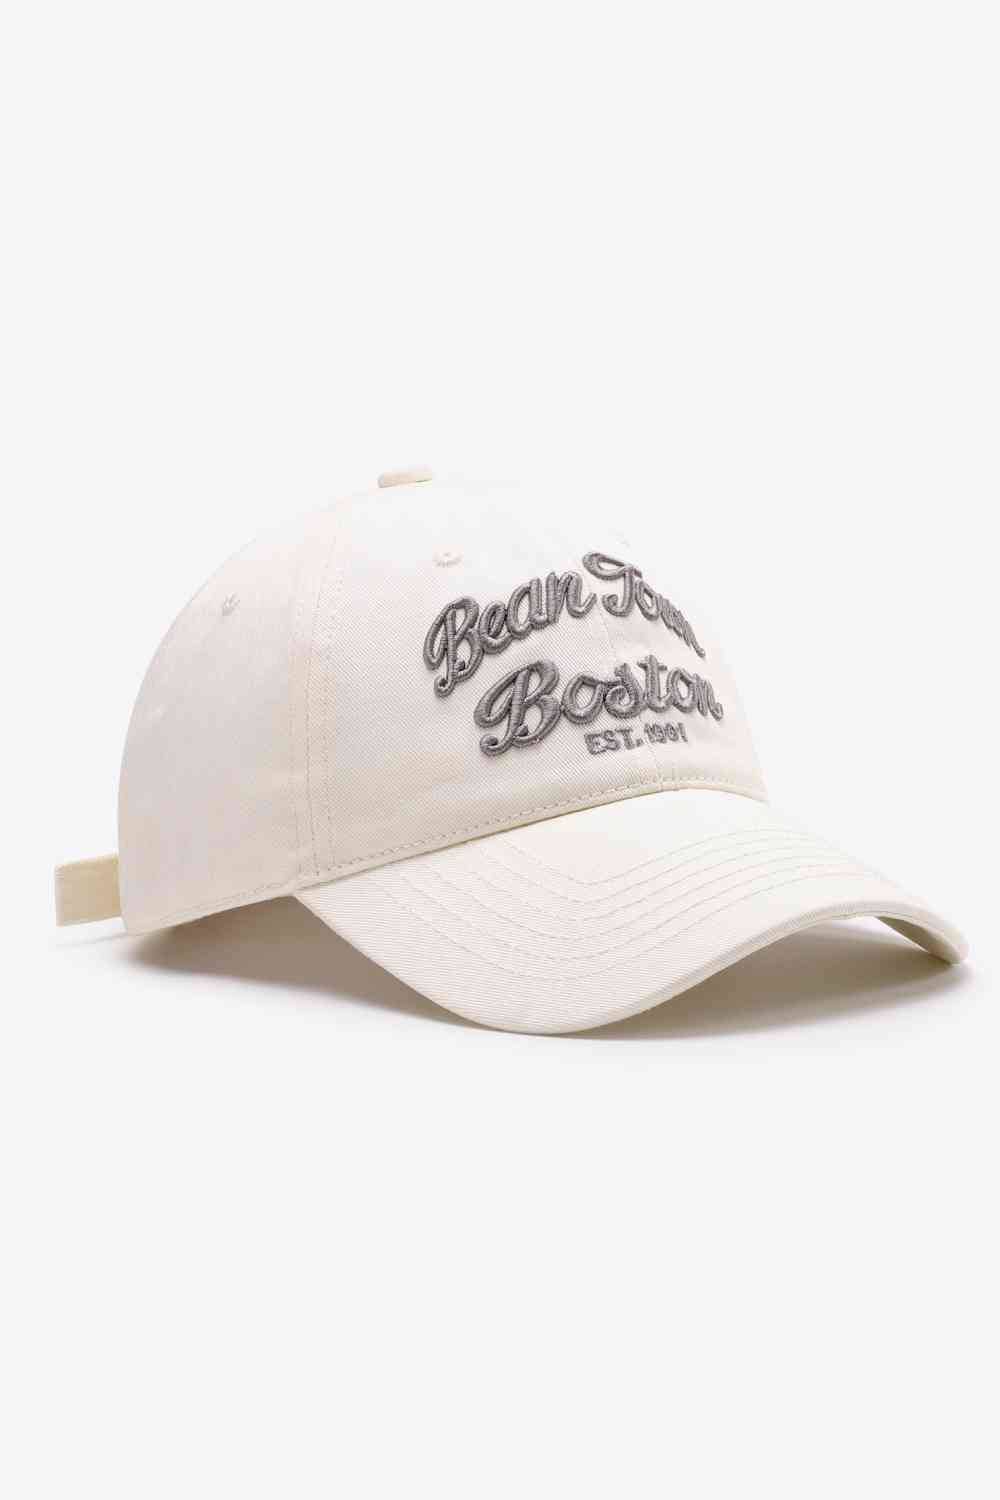 Embroidered Graphic Adjustable Baseball Cap - Rose Gold Co. Shop